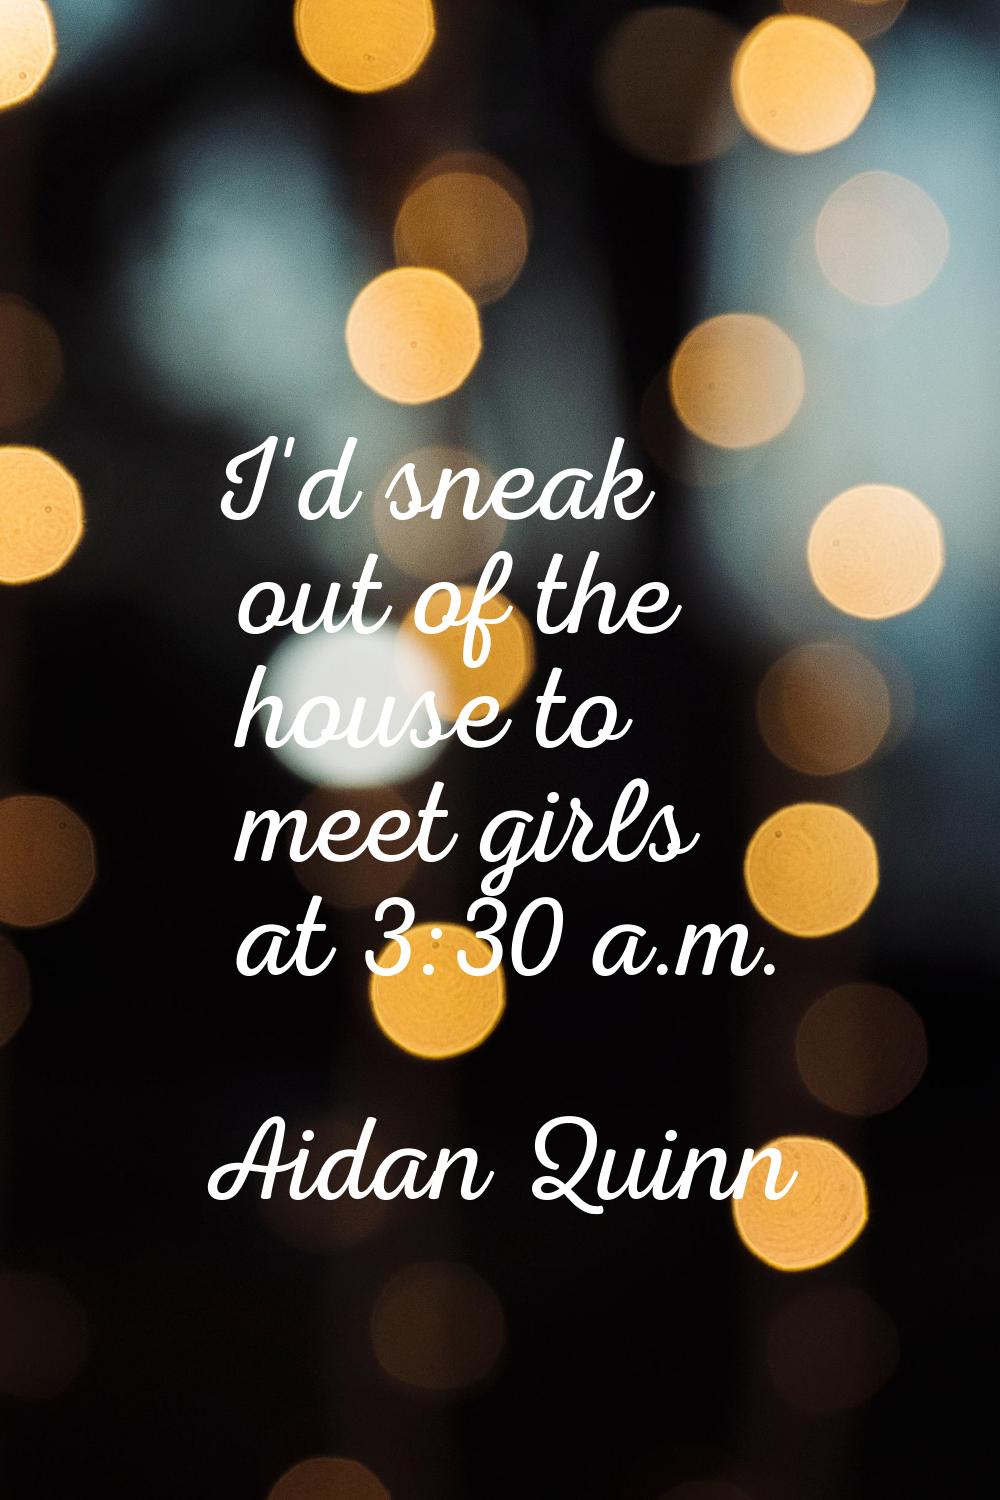 I'd sneak out of the house to meet girls at 3:30 a.m.